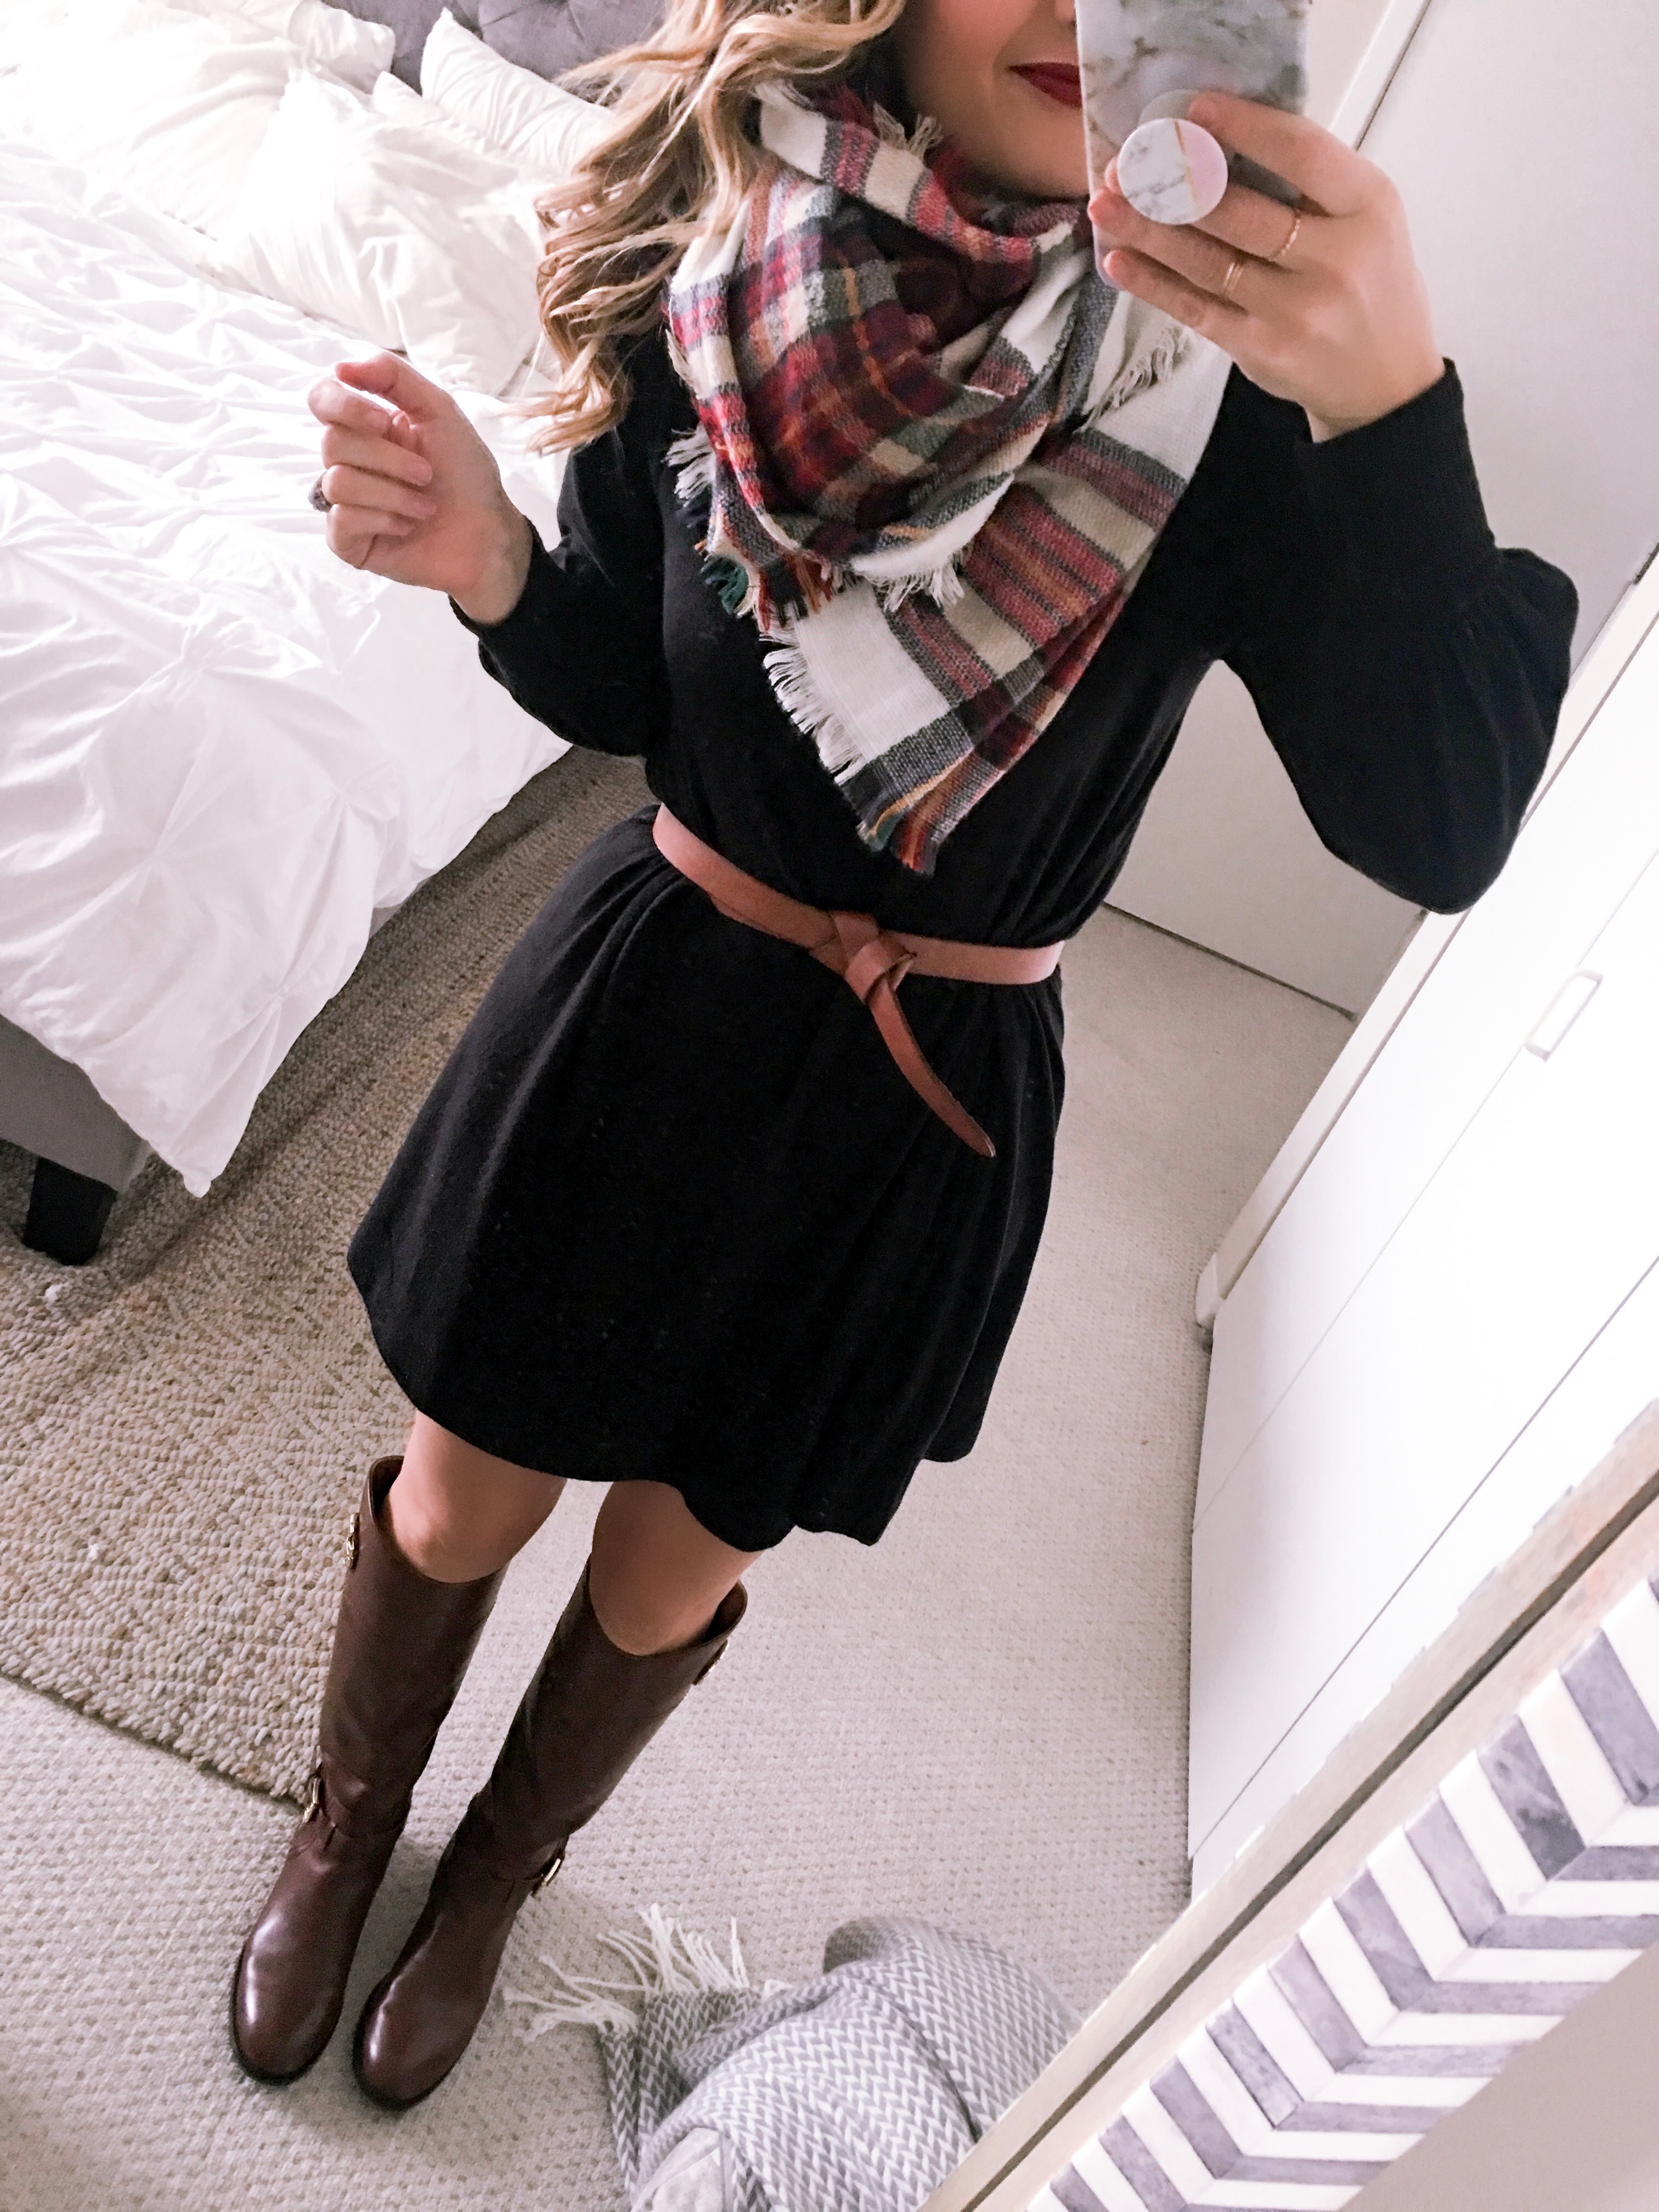 OOTD : Black Dress and Brown Riding Boots